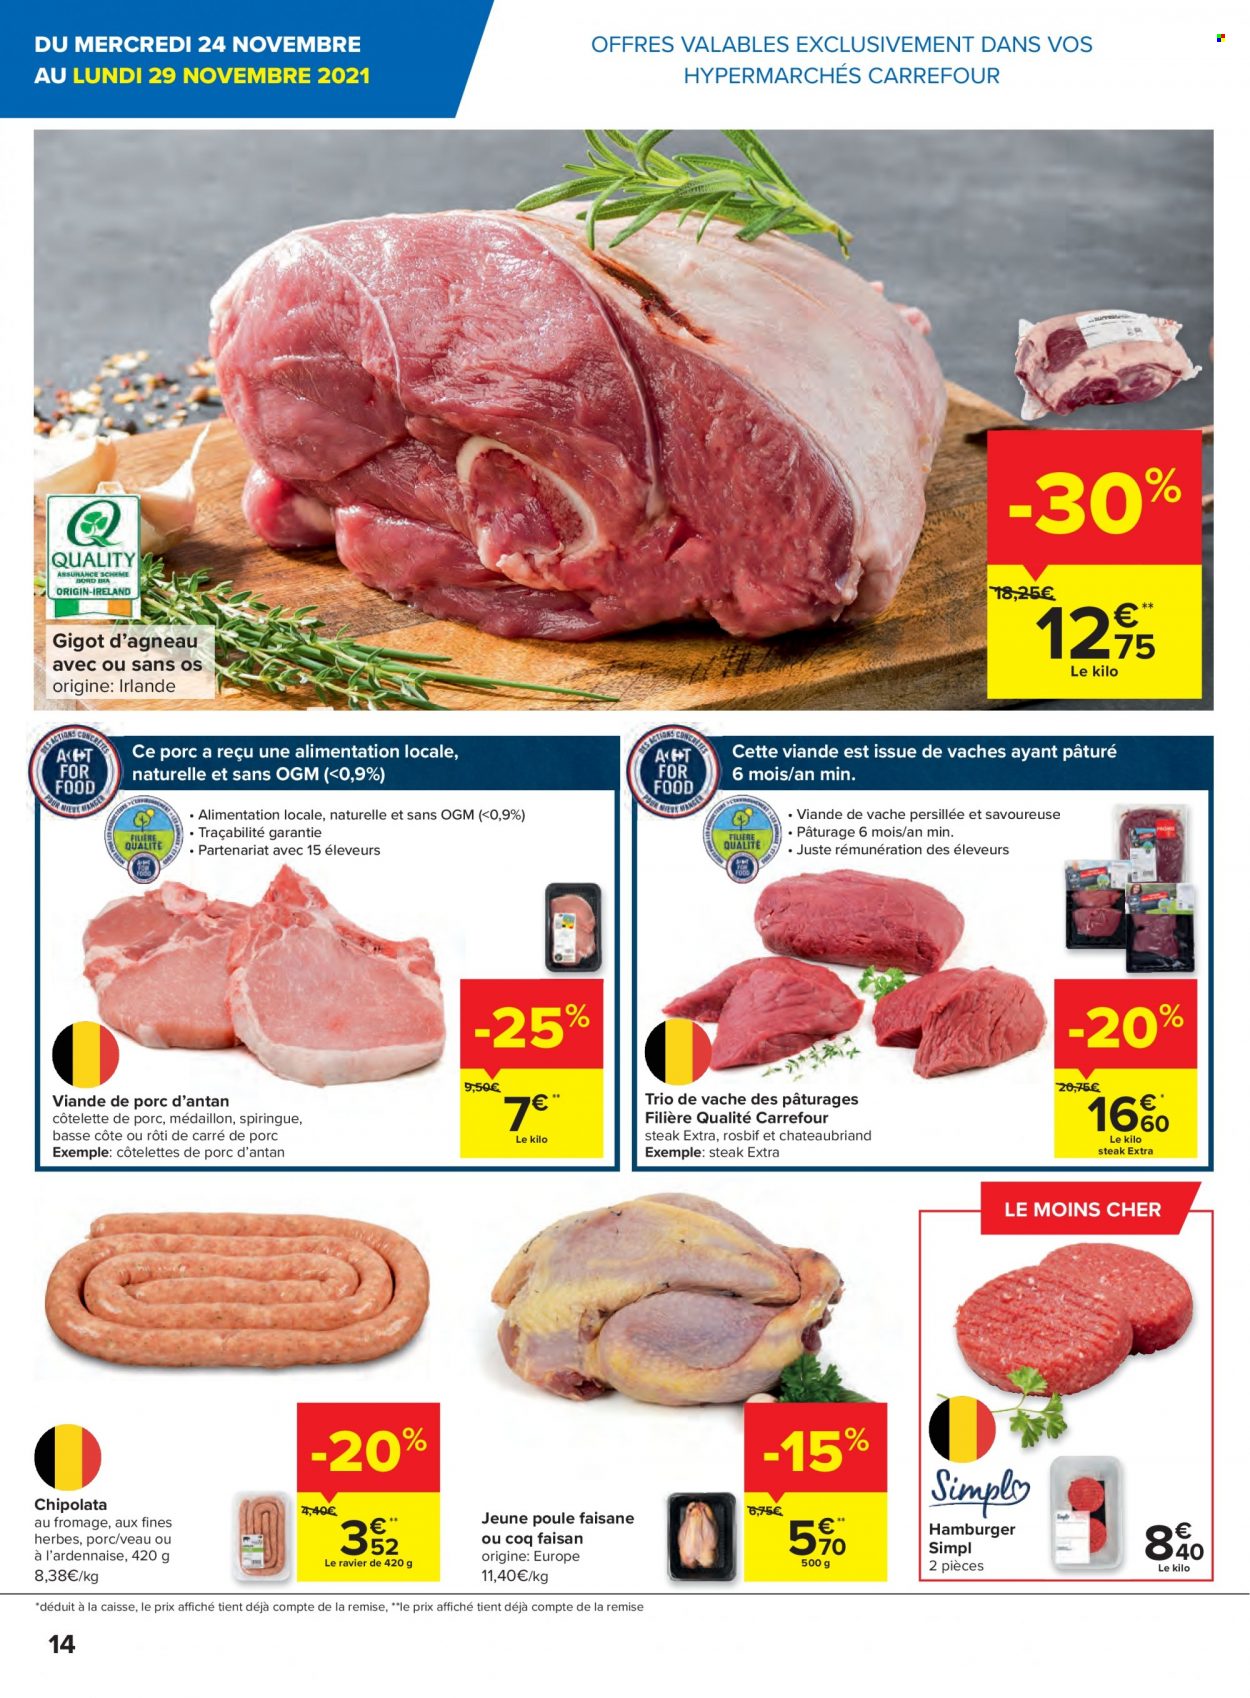 Catalogue Carrefour hypermarkt - 24.11.2021 - 6.12.2021. Page 14.